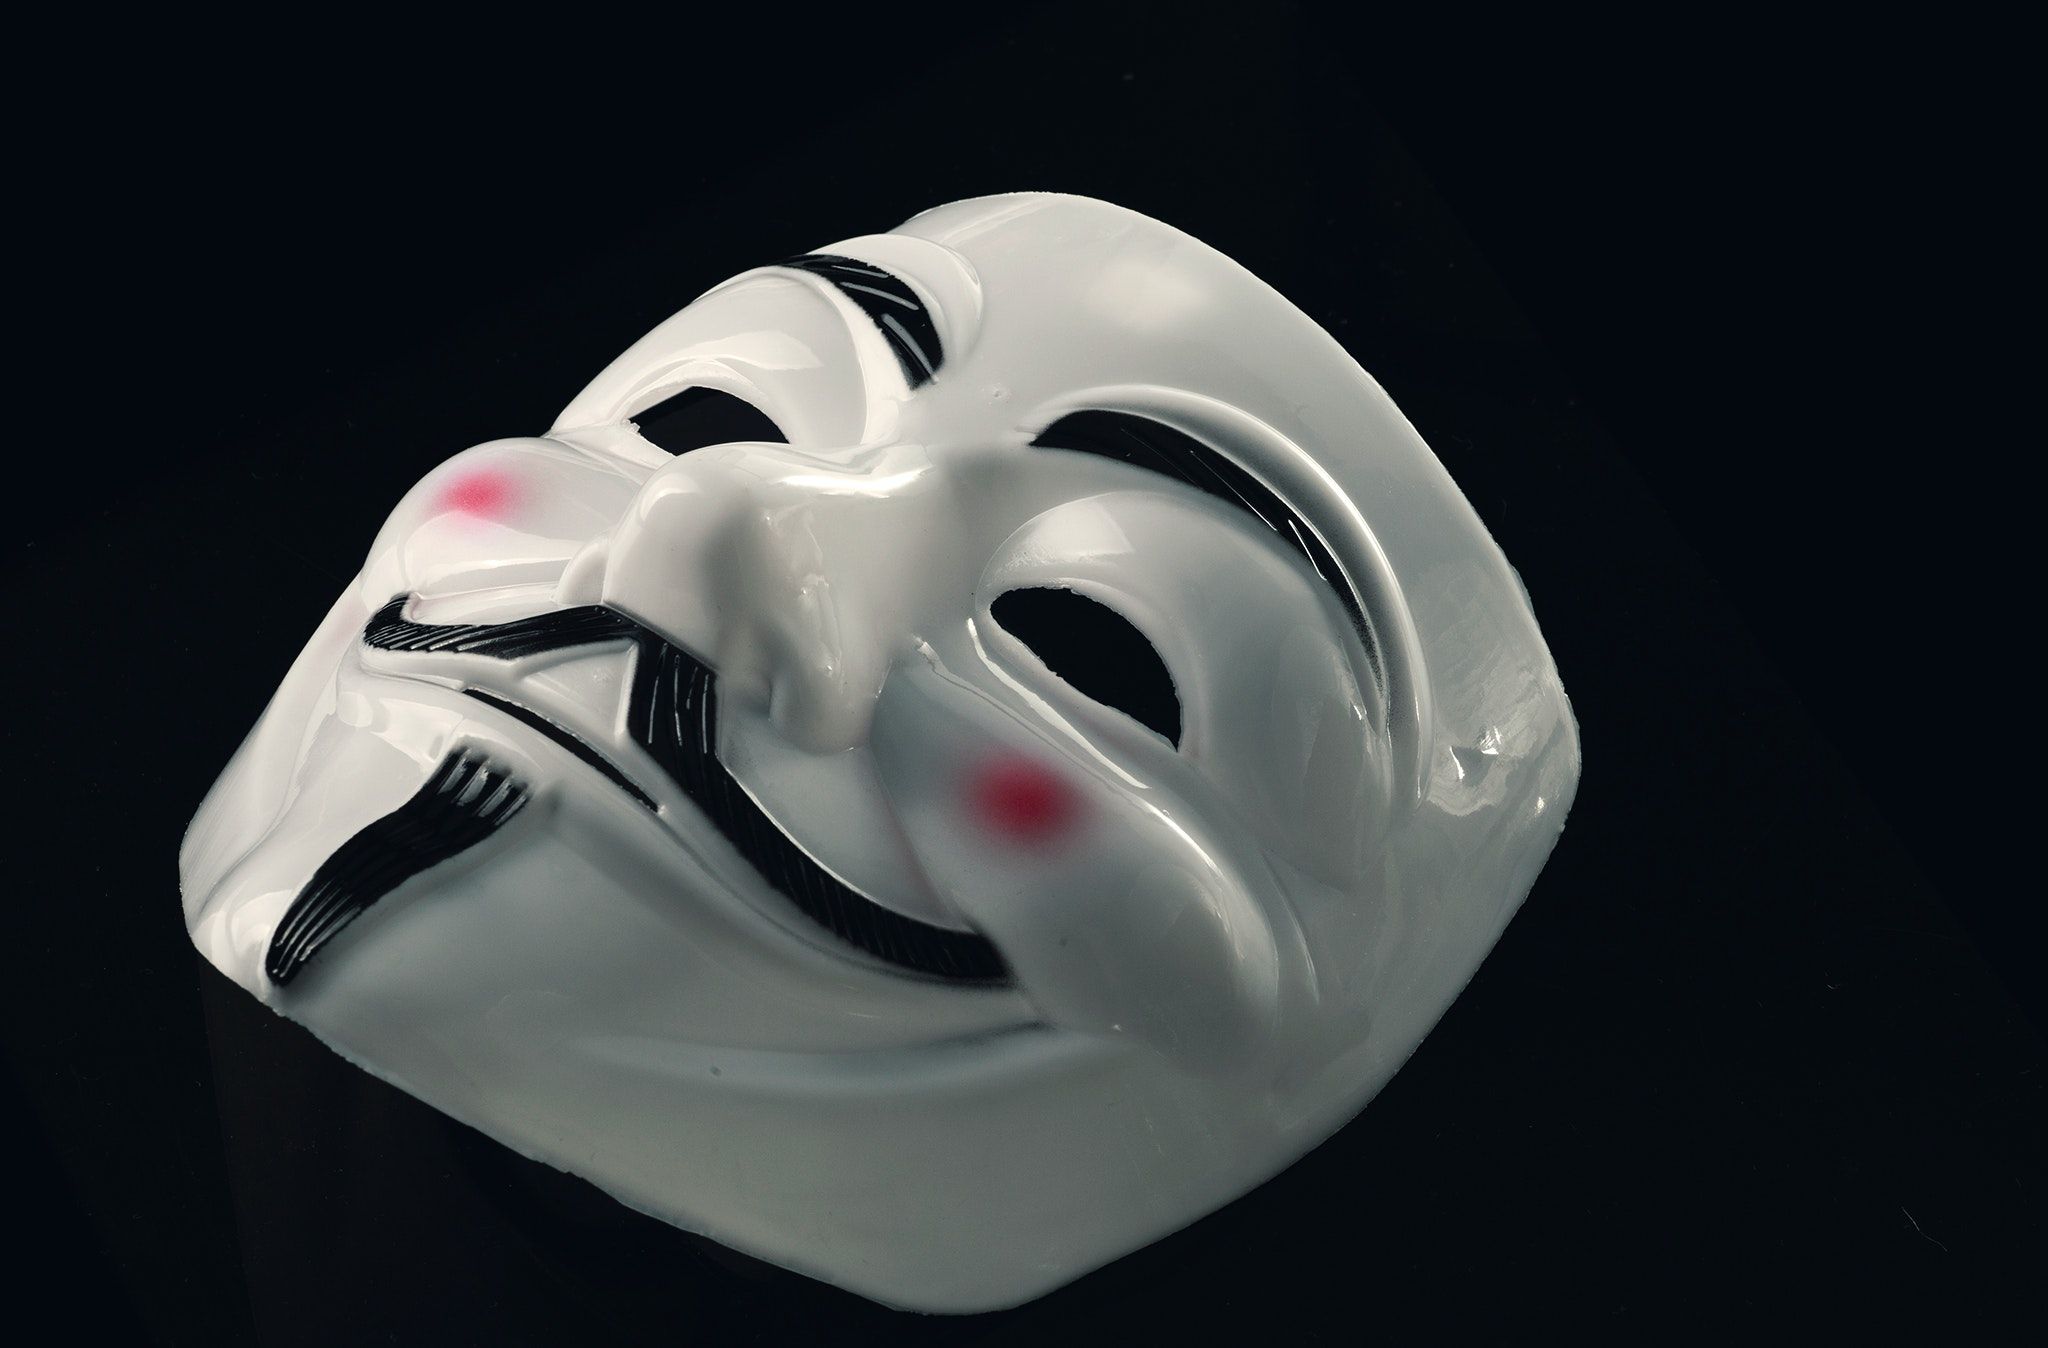 Theatrical mask associated with hackers lies flat on a black surface